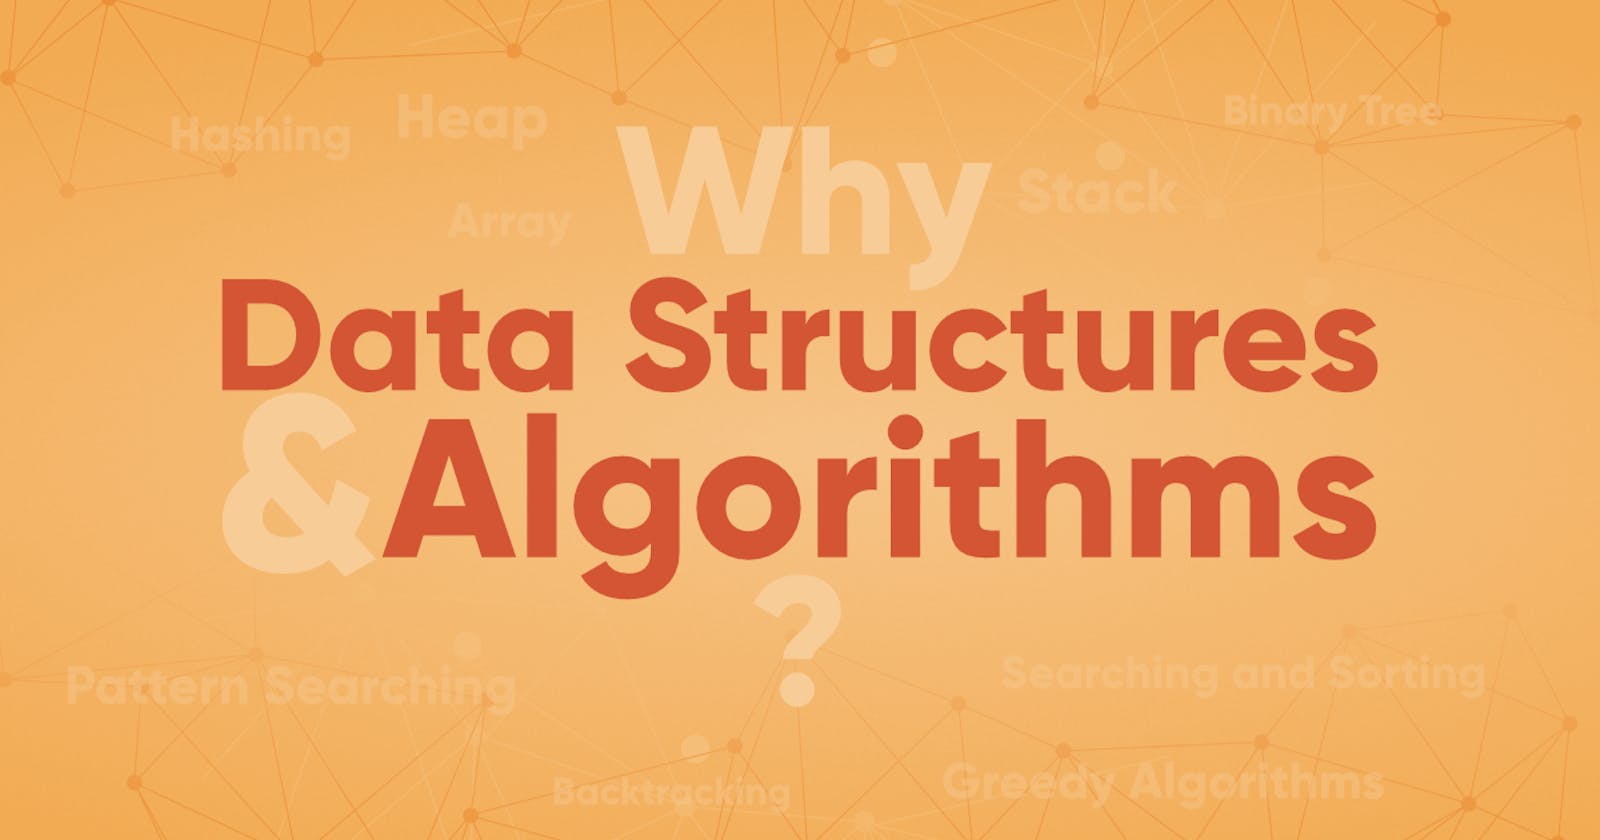 Why Data structures & Algorithms?